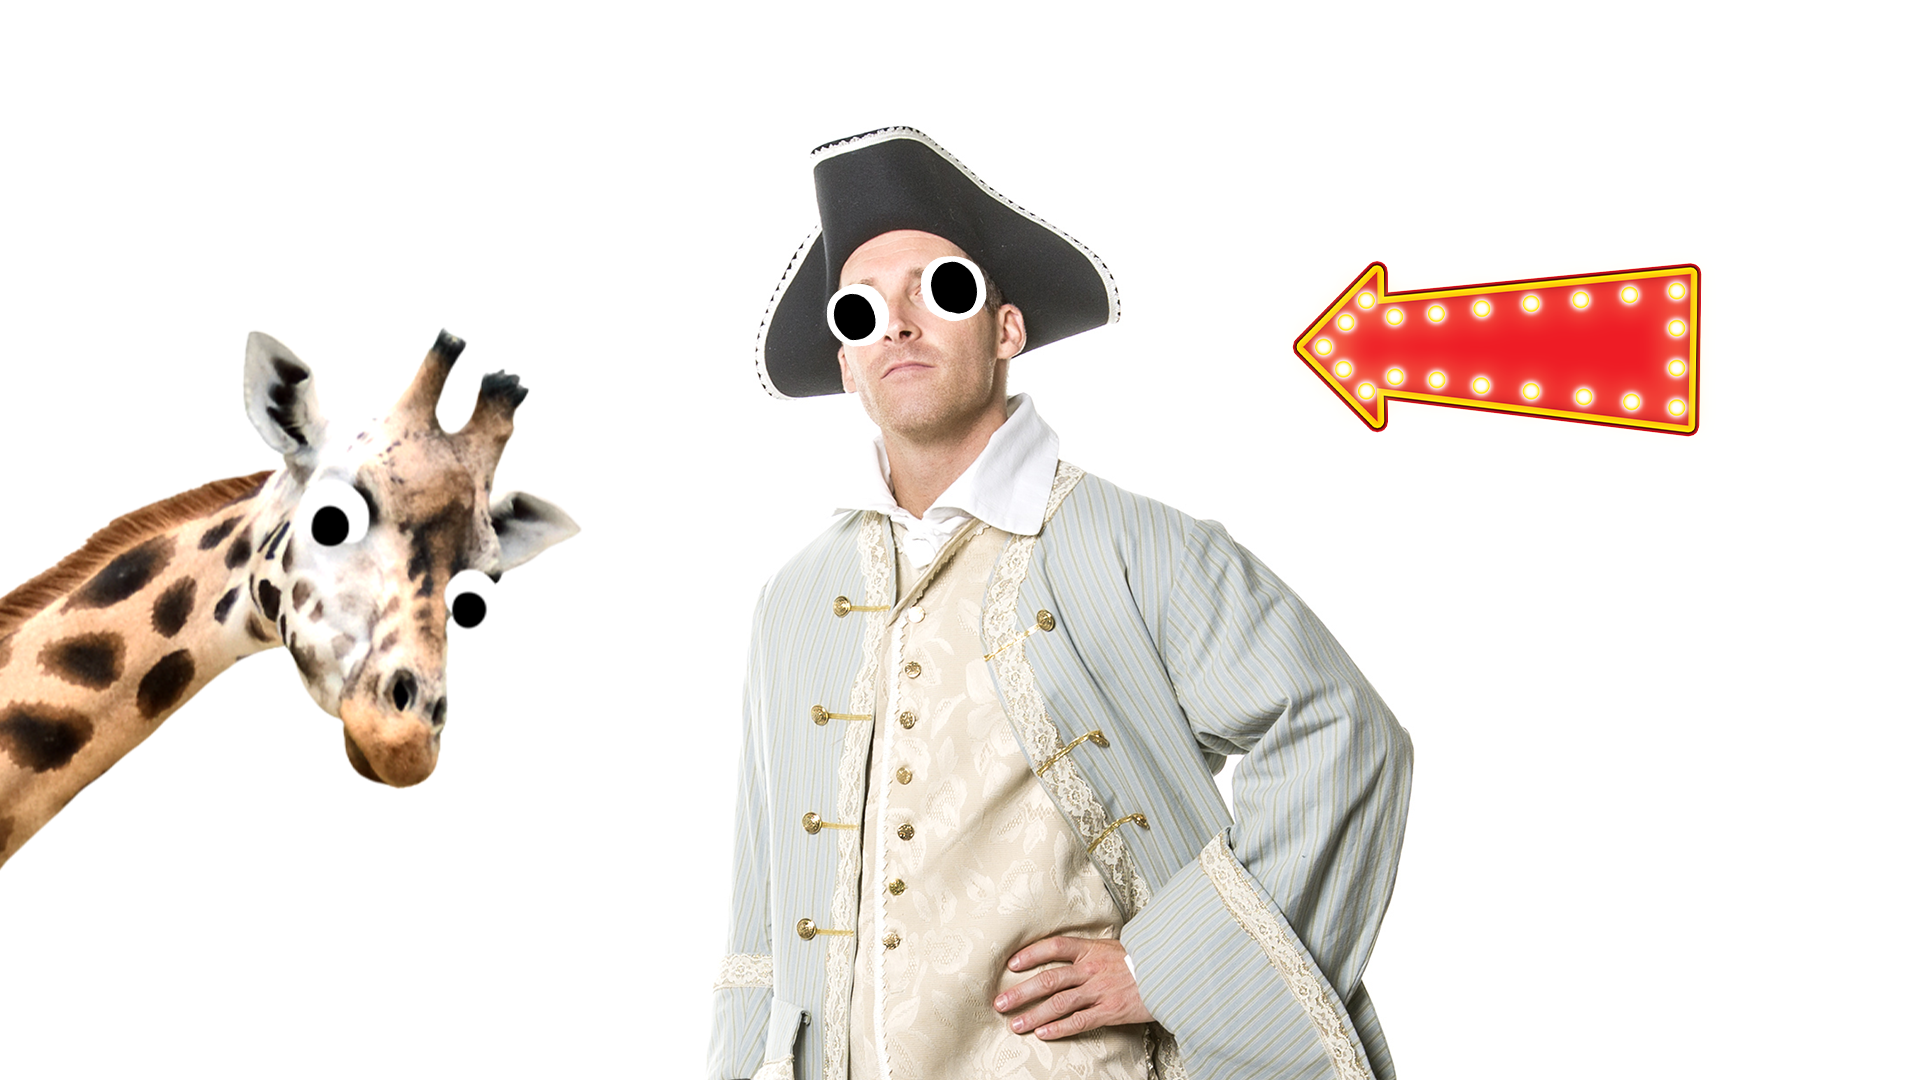 Man in Georgian clothes on white background with goofy giraffe and arrow